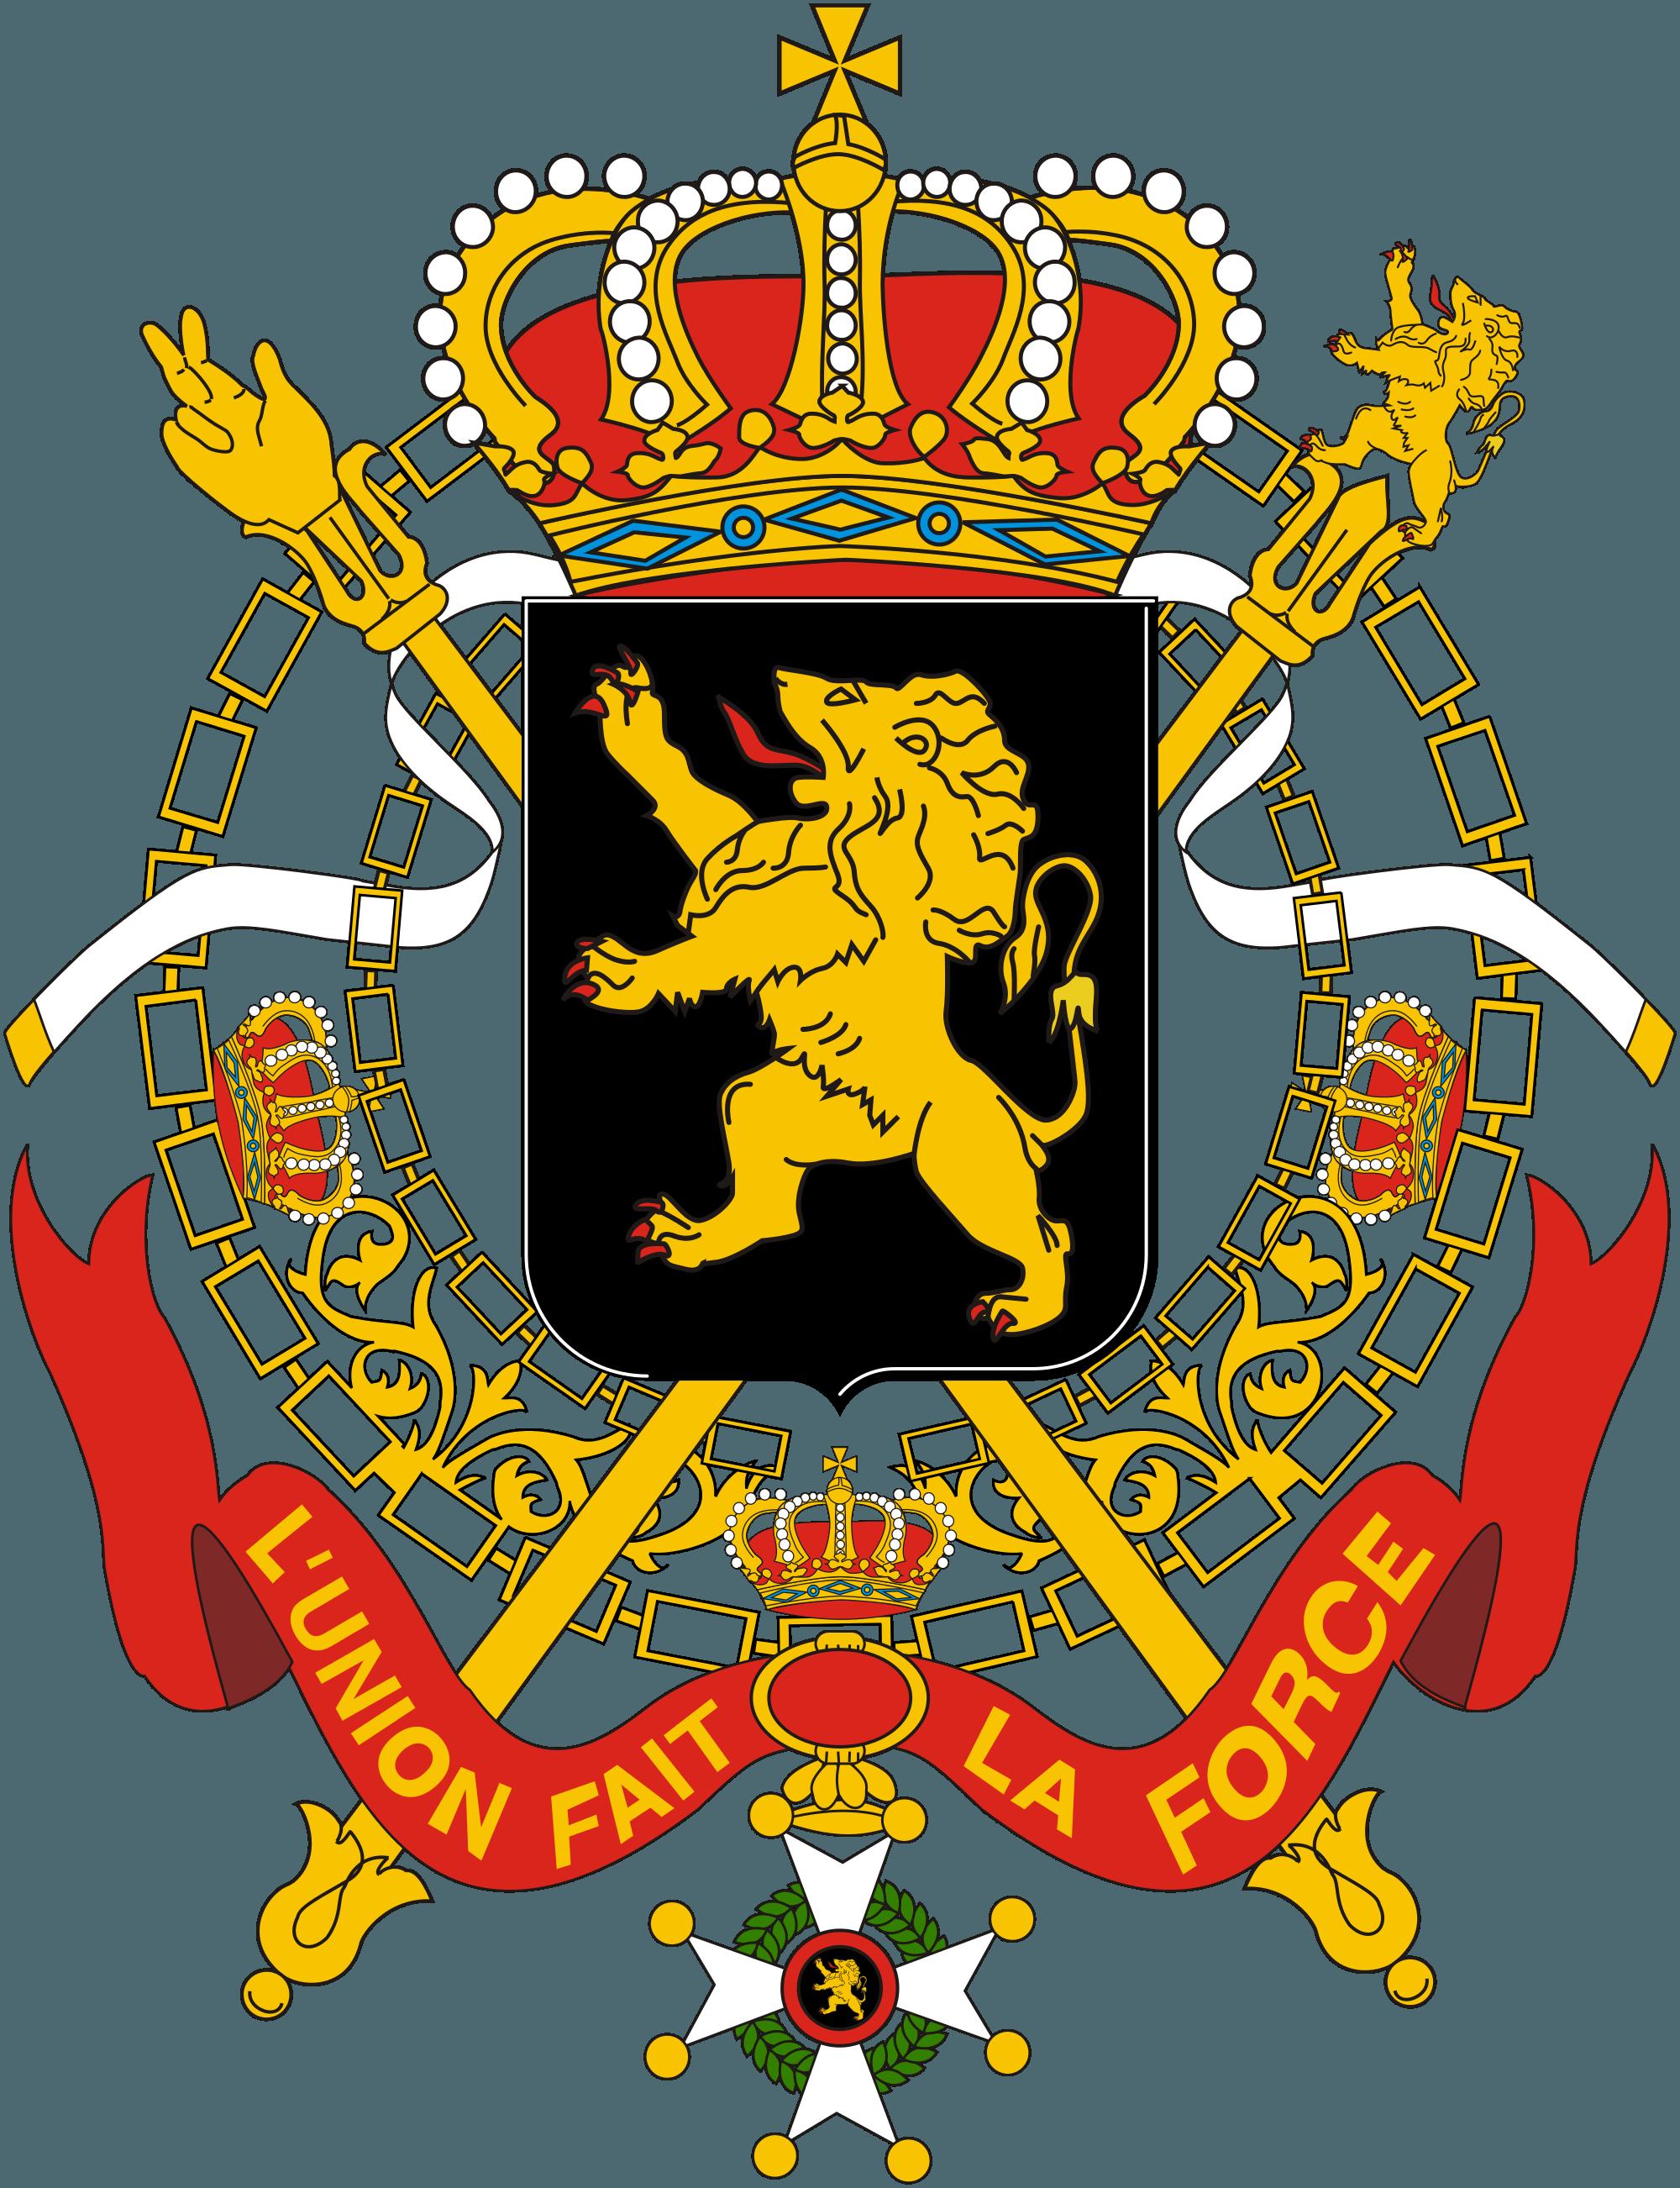 Belgium Logo - File:Coats of arms of Belgium Government.svg - Wikimedia Commons